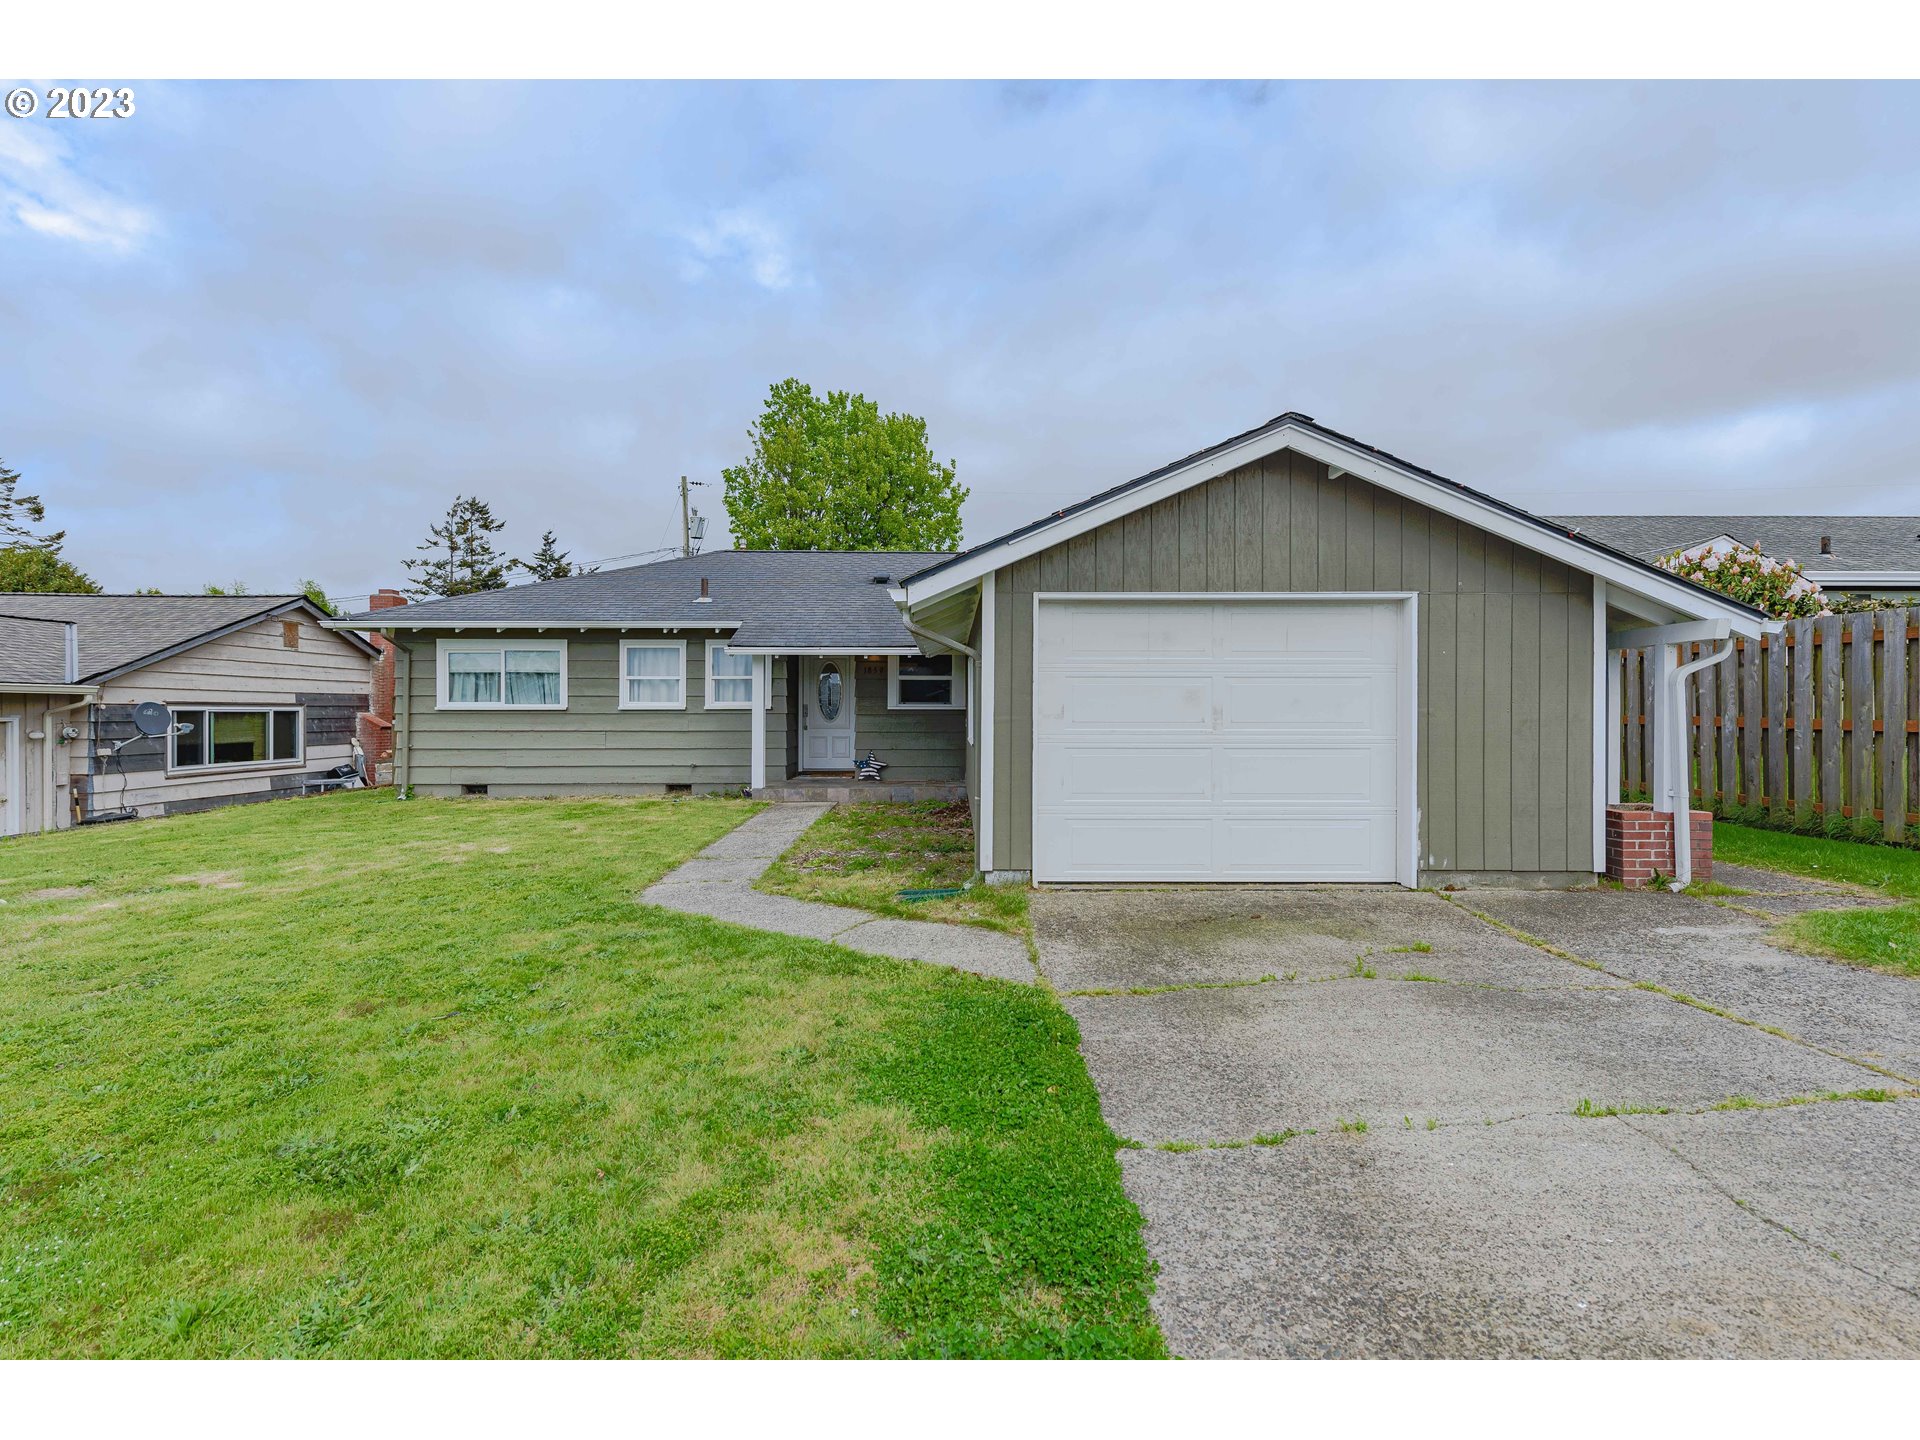 1859 GRANT ST, North Bend, OR 97459